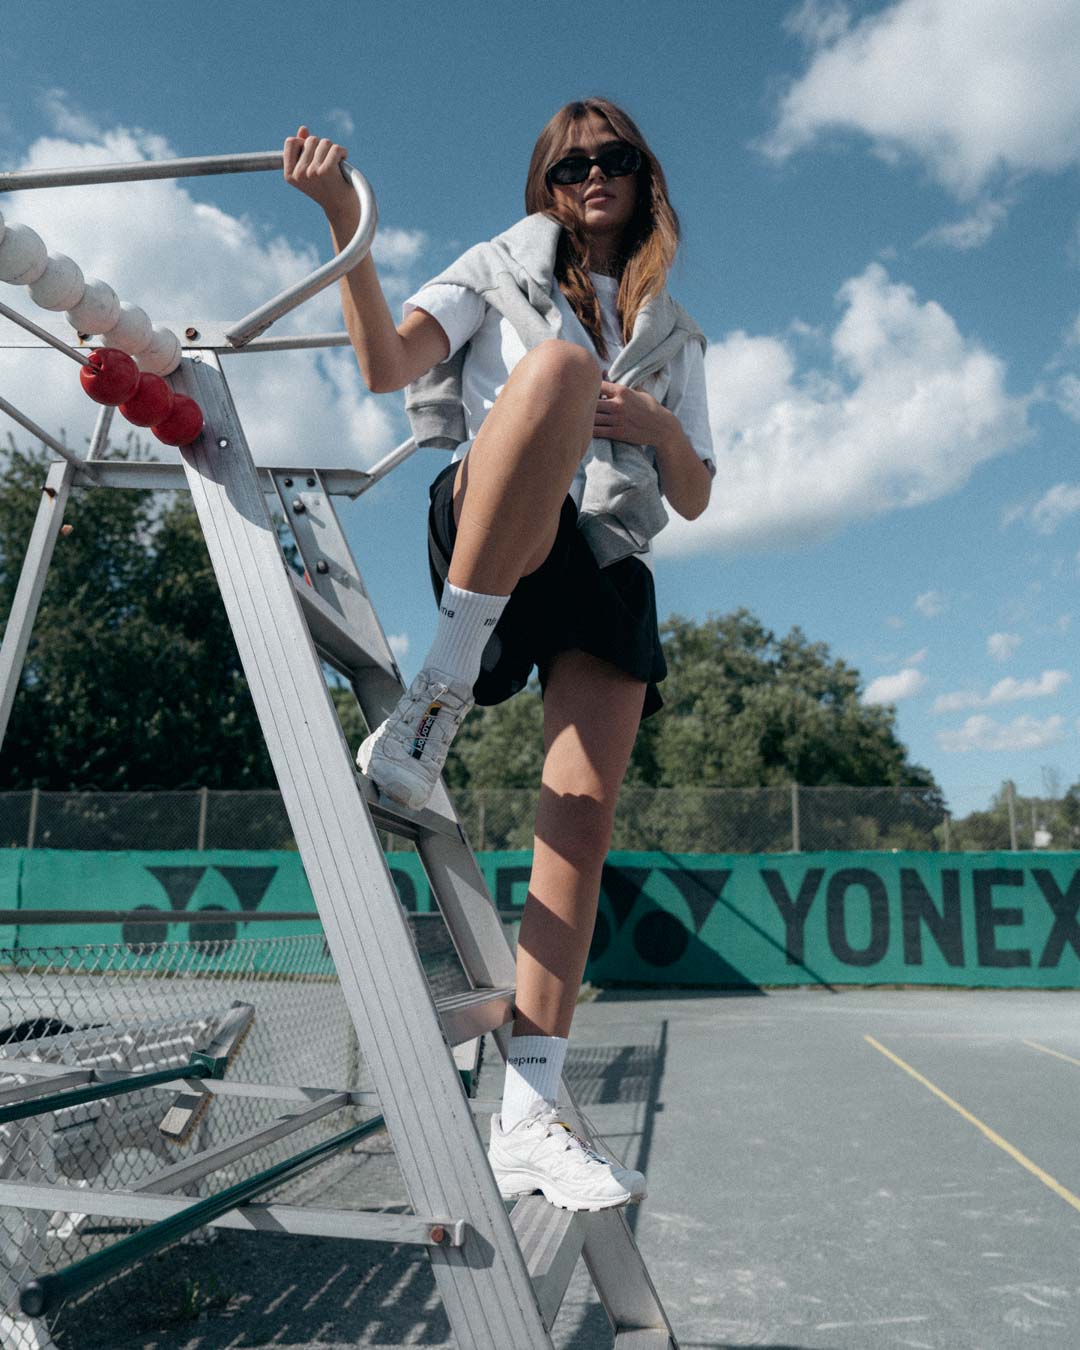 Woman posing on tennis umpire chair in ninepine activwear